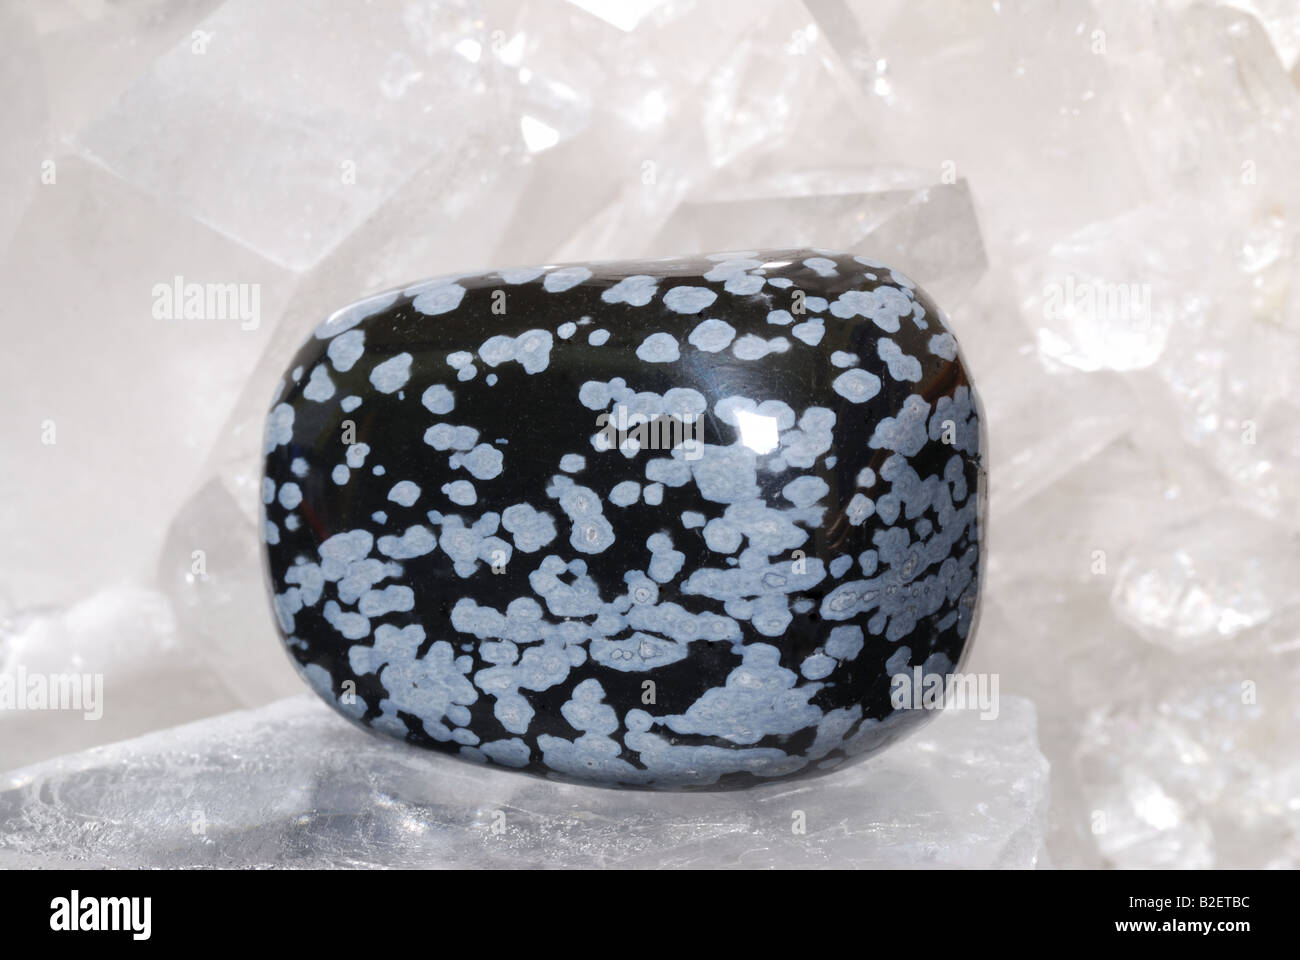 Flake obsidian gem energized on druze of quartz crystals. This gem is used as a jewel stone and also in alternative medicine. Stock Photo